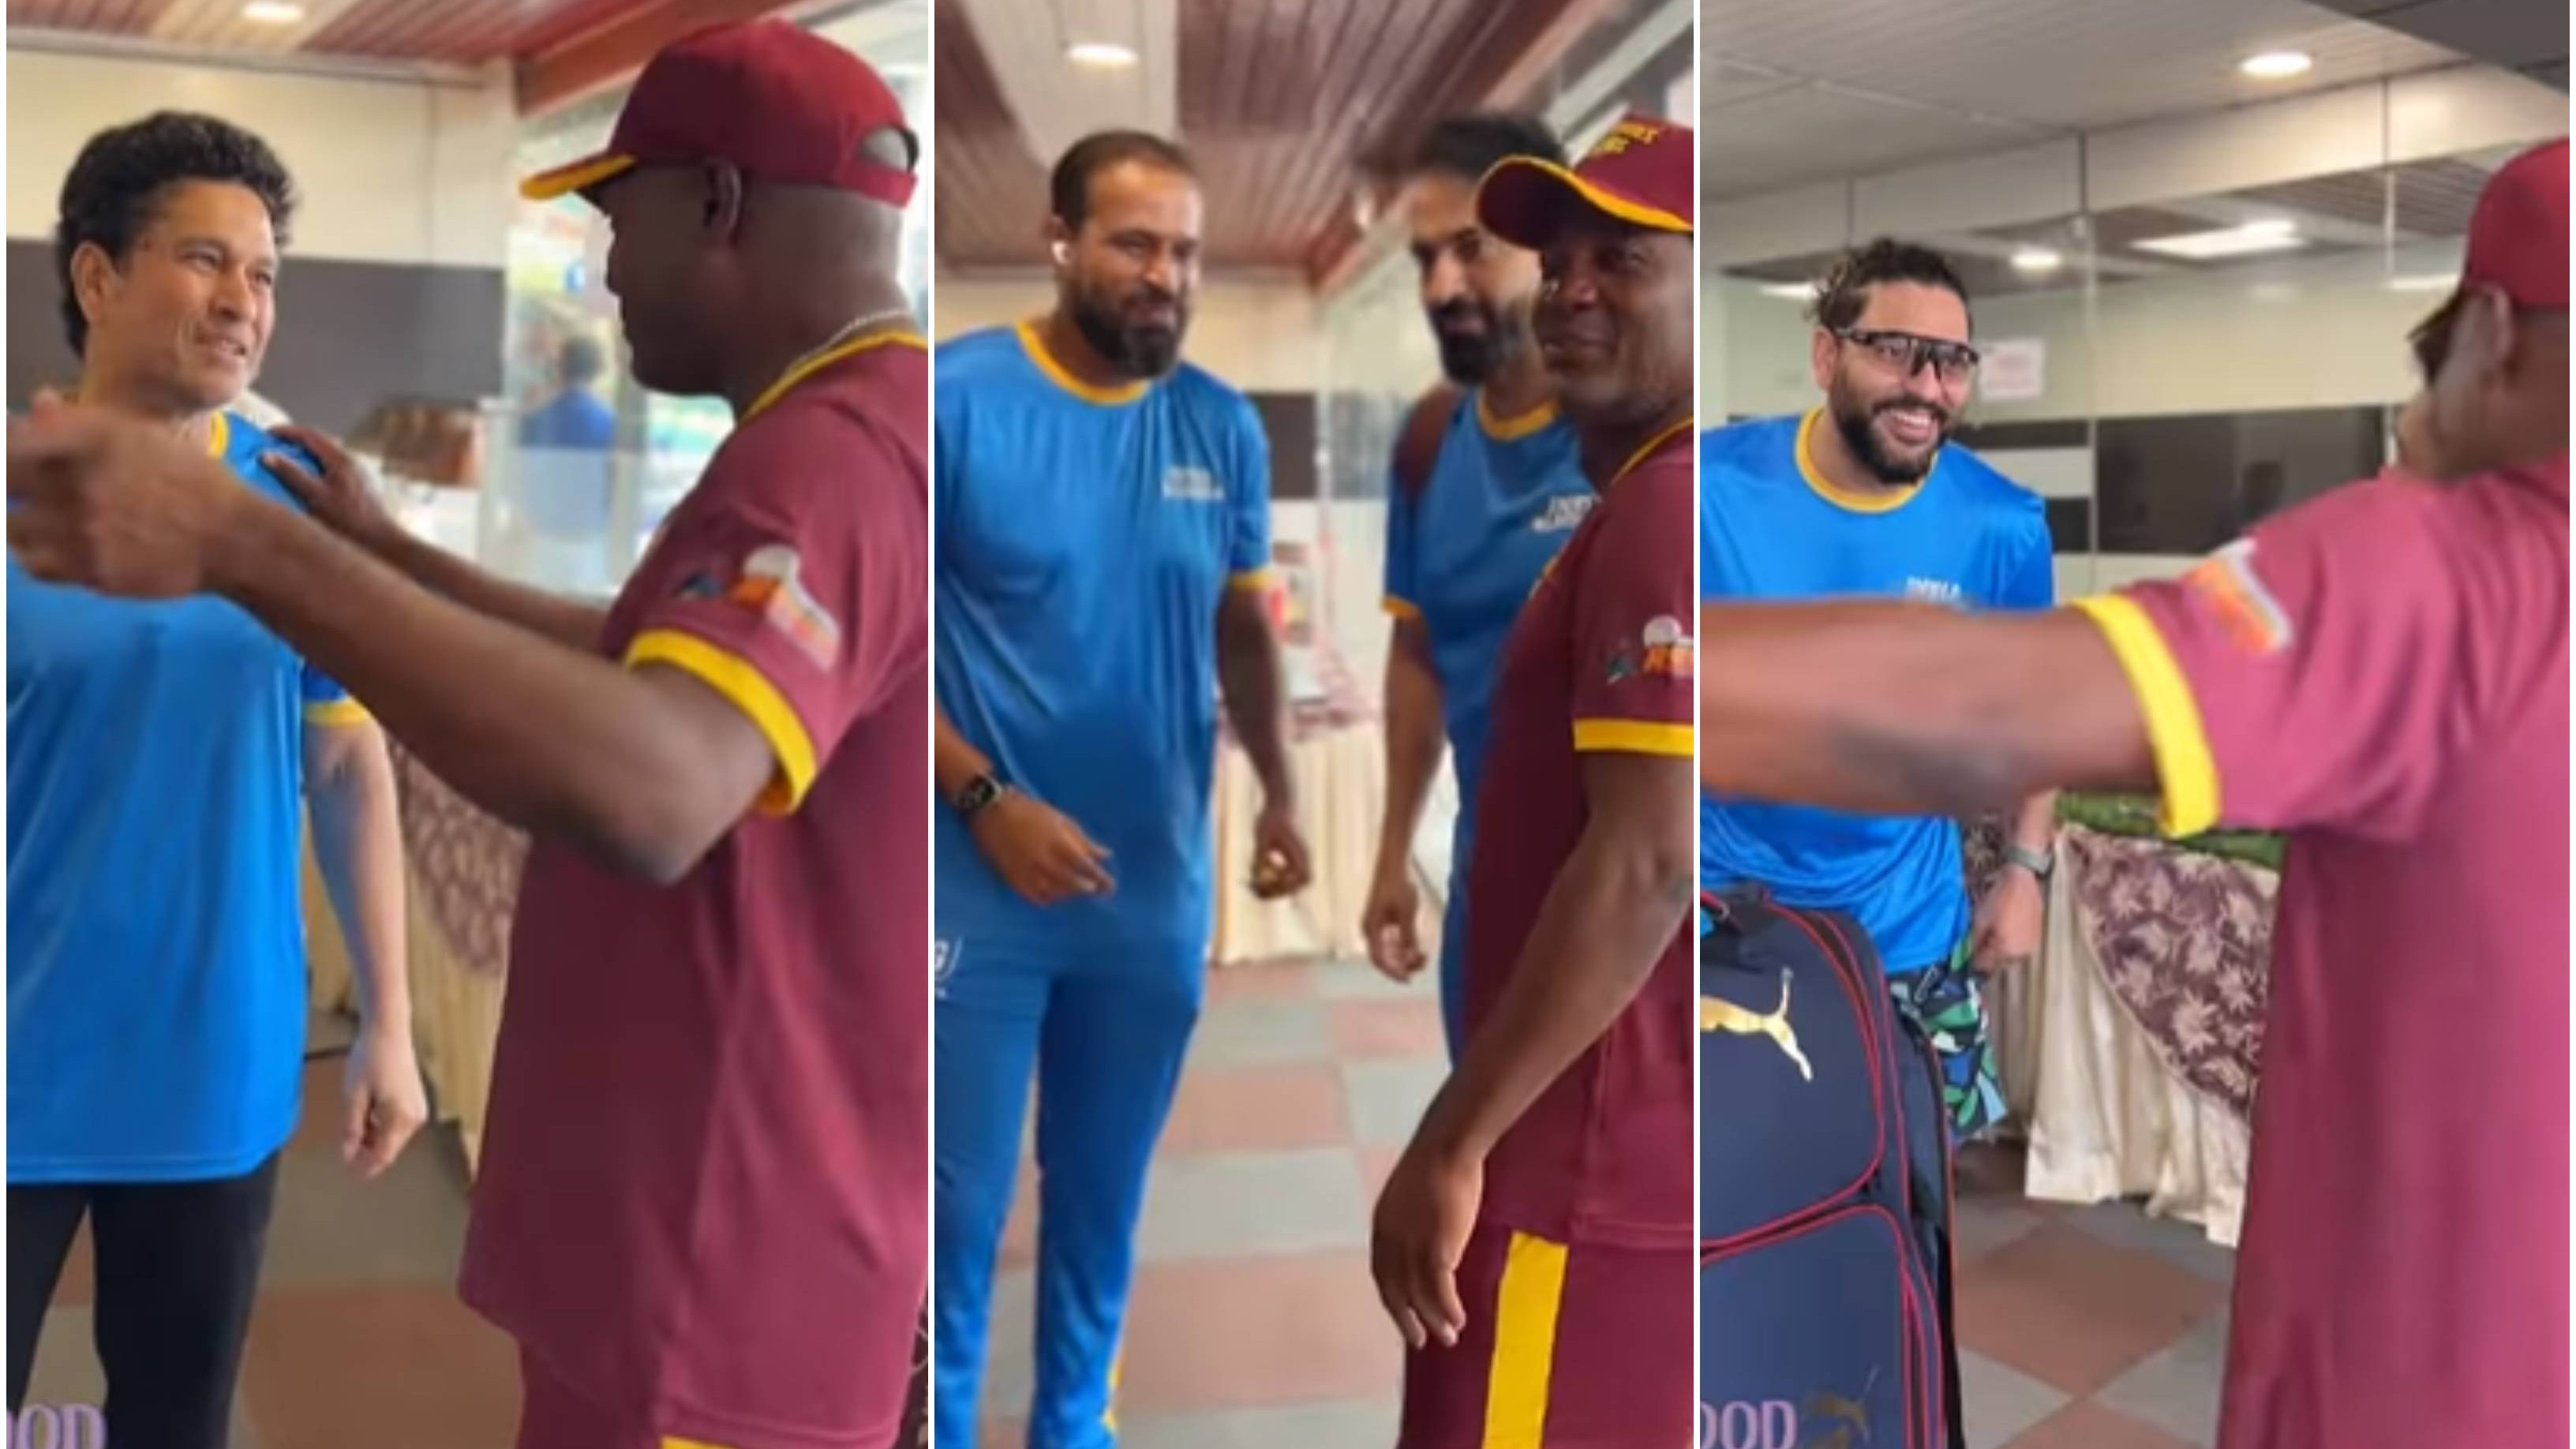 RSWS 2022: WATCH – Brian Lara meets Sachin Tendulkar and other players from India Legends squad ahead of the match